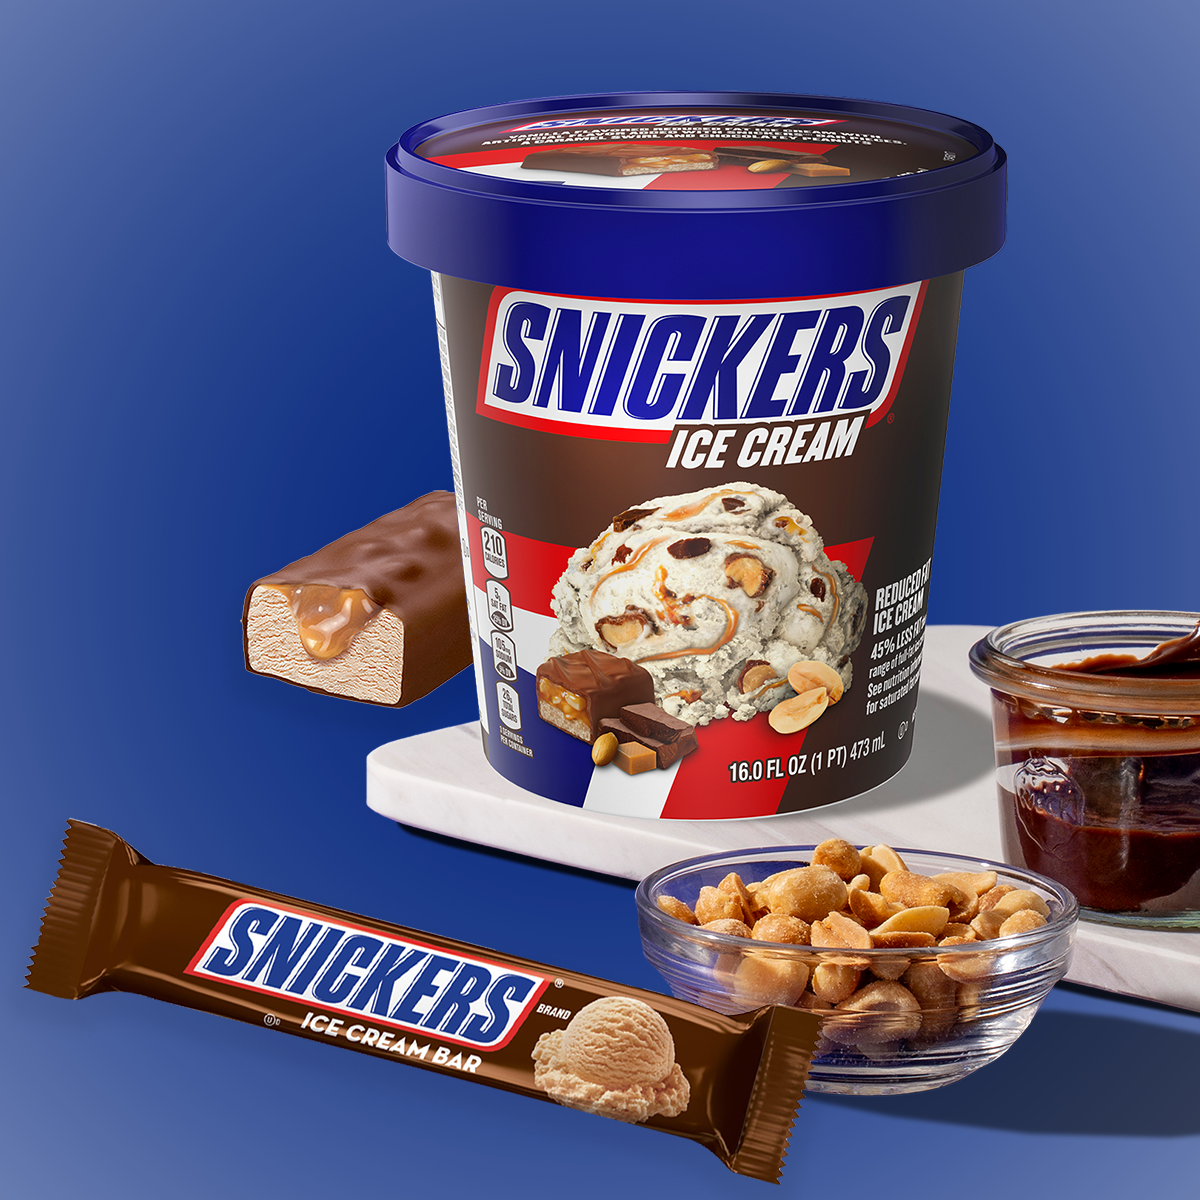 snickers ice cream pint and bar from wholesale distributor transcold distribution